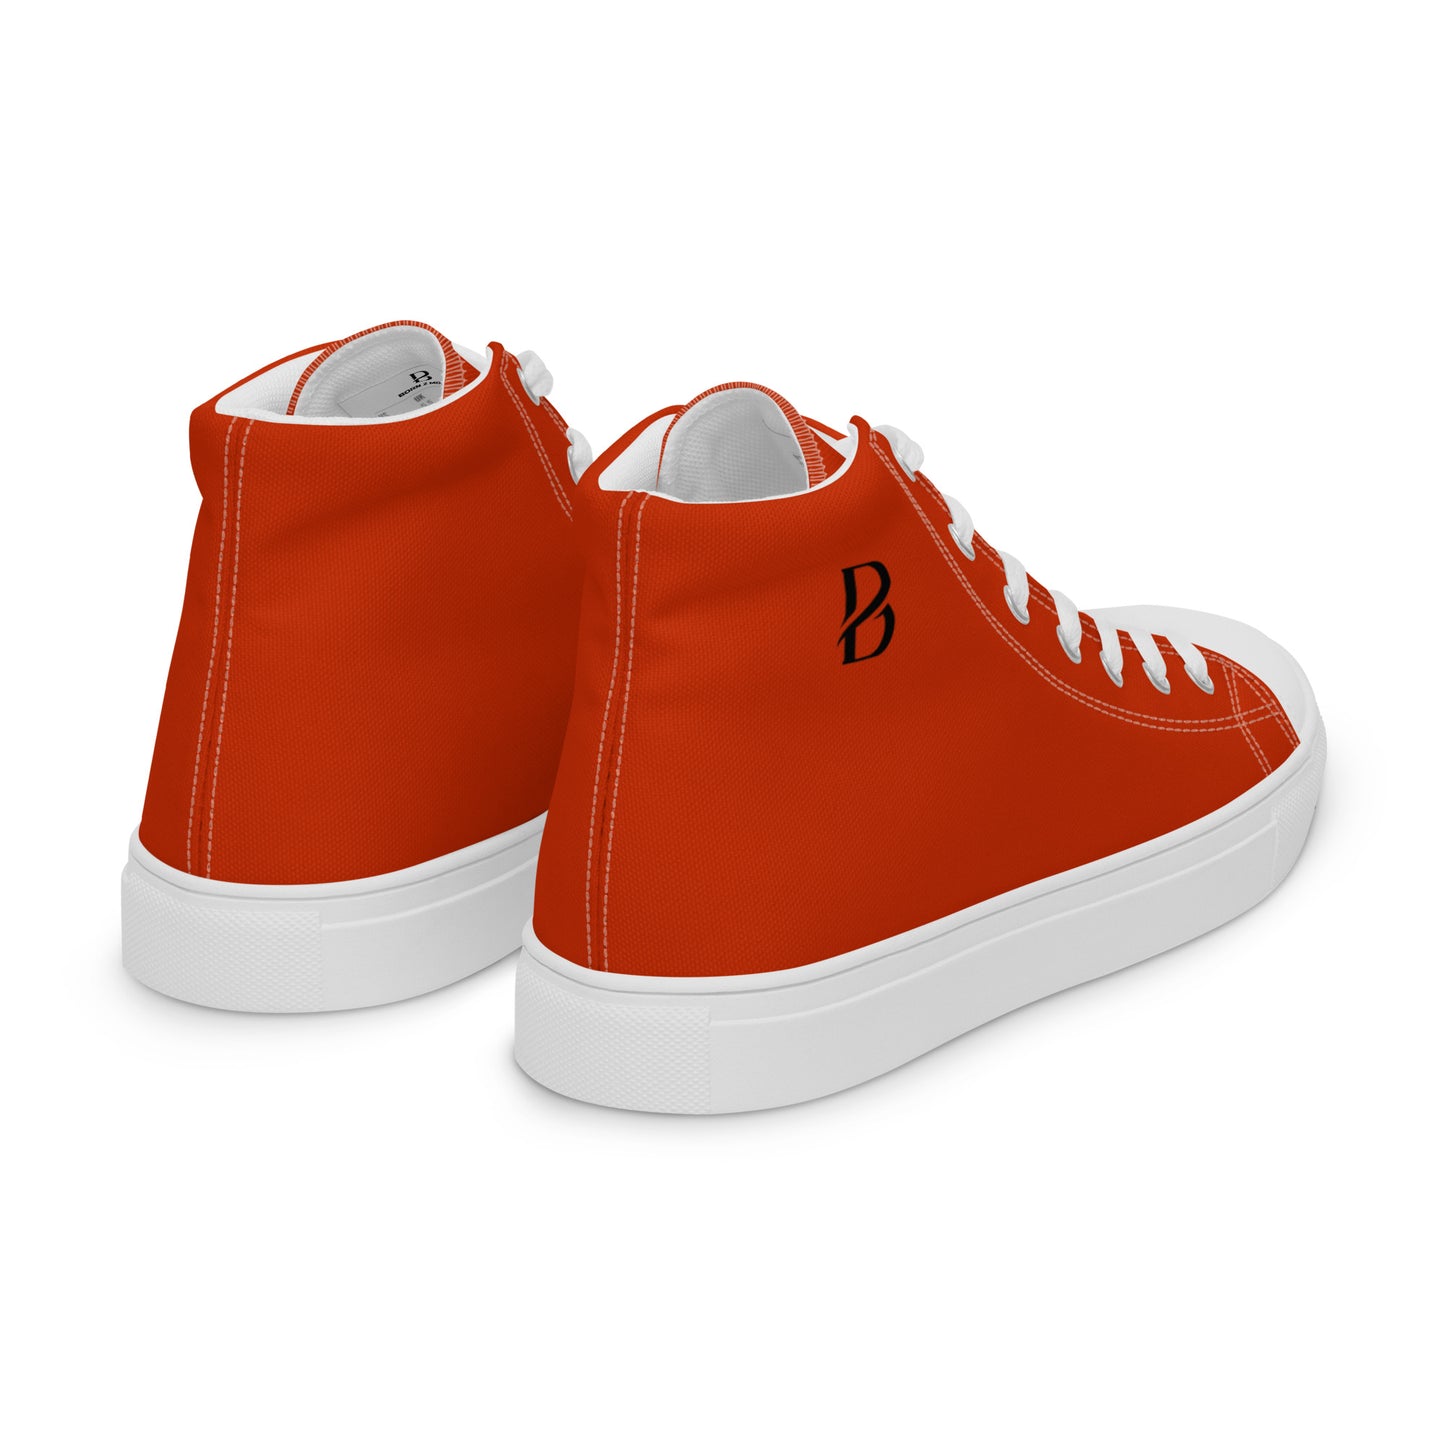 Harley Red & Black Logo Born To Move "B" Men’s High Top Canvas Shoes